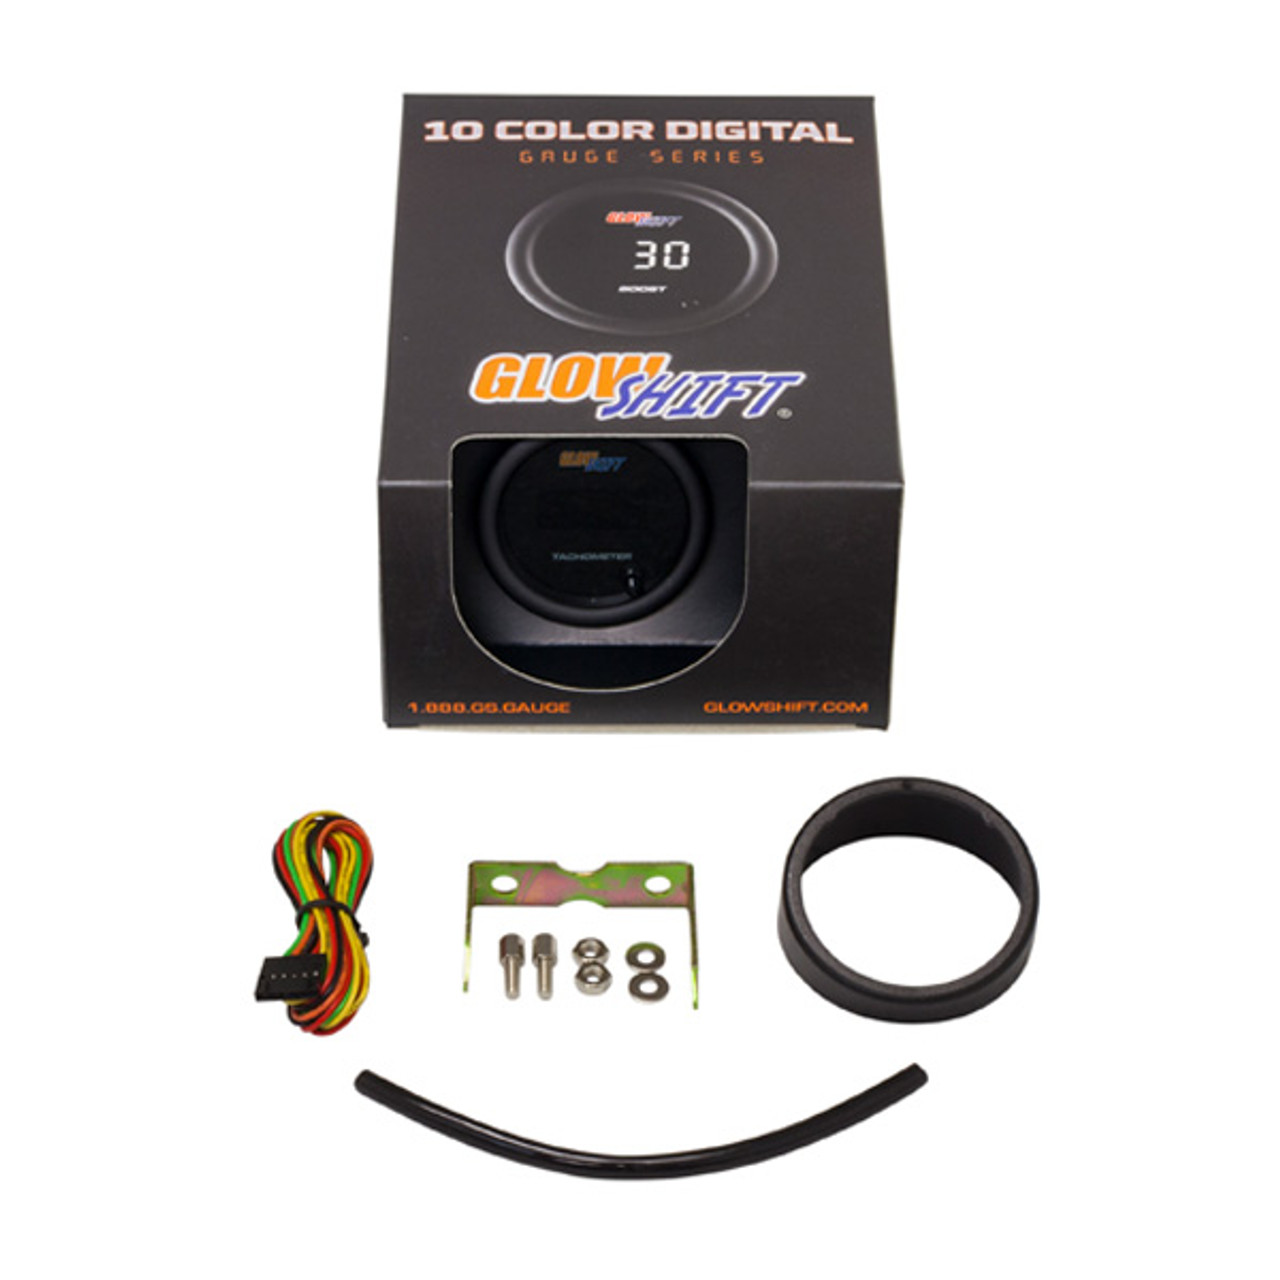 Dynoracing 252mm 12V Car Auto Digital Smoked Tachometer 0~10000 RPM 20 LED  Light Display Tacho Car Meter BX101449 From Bxracing, $7.24